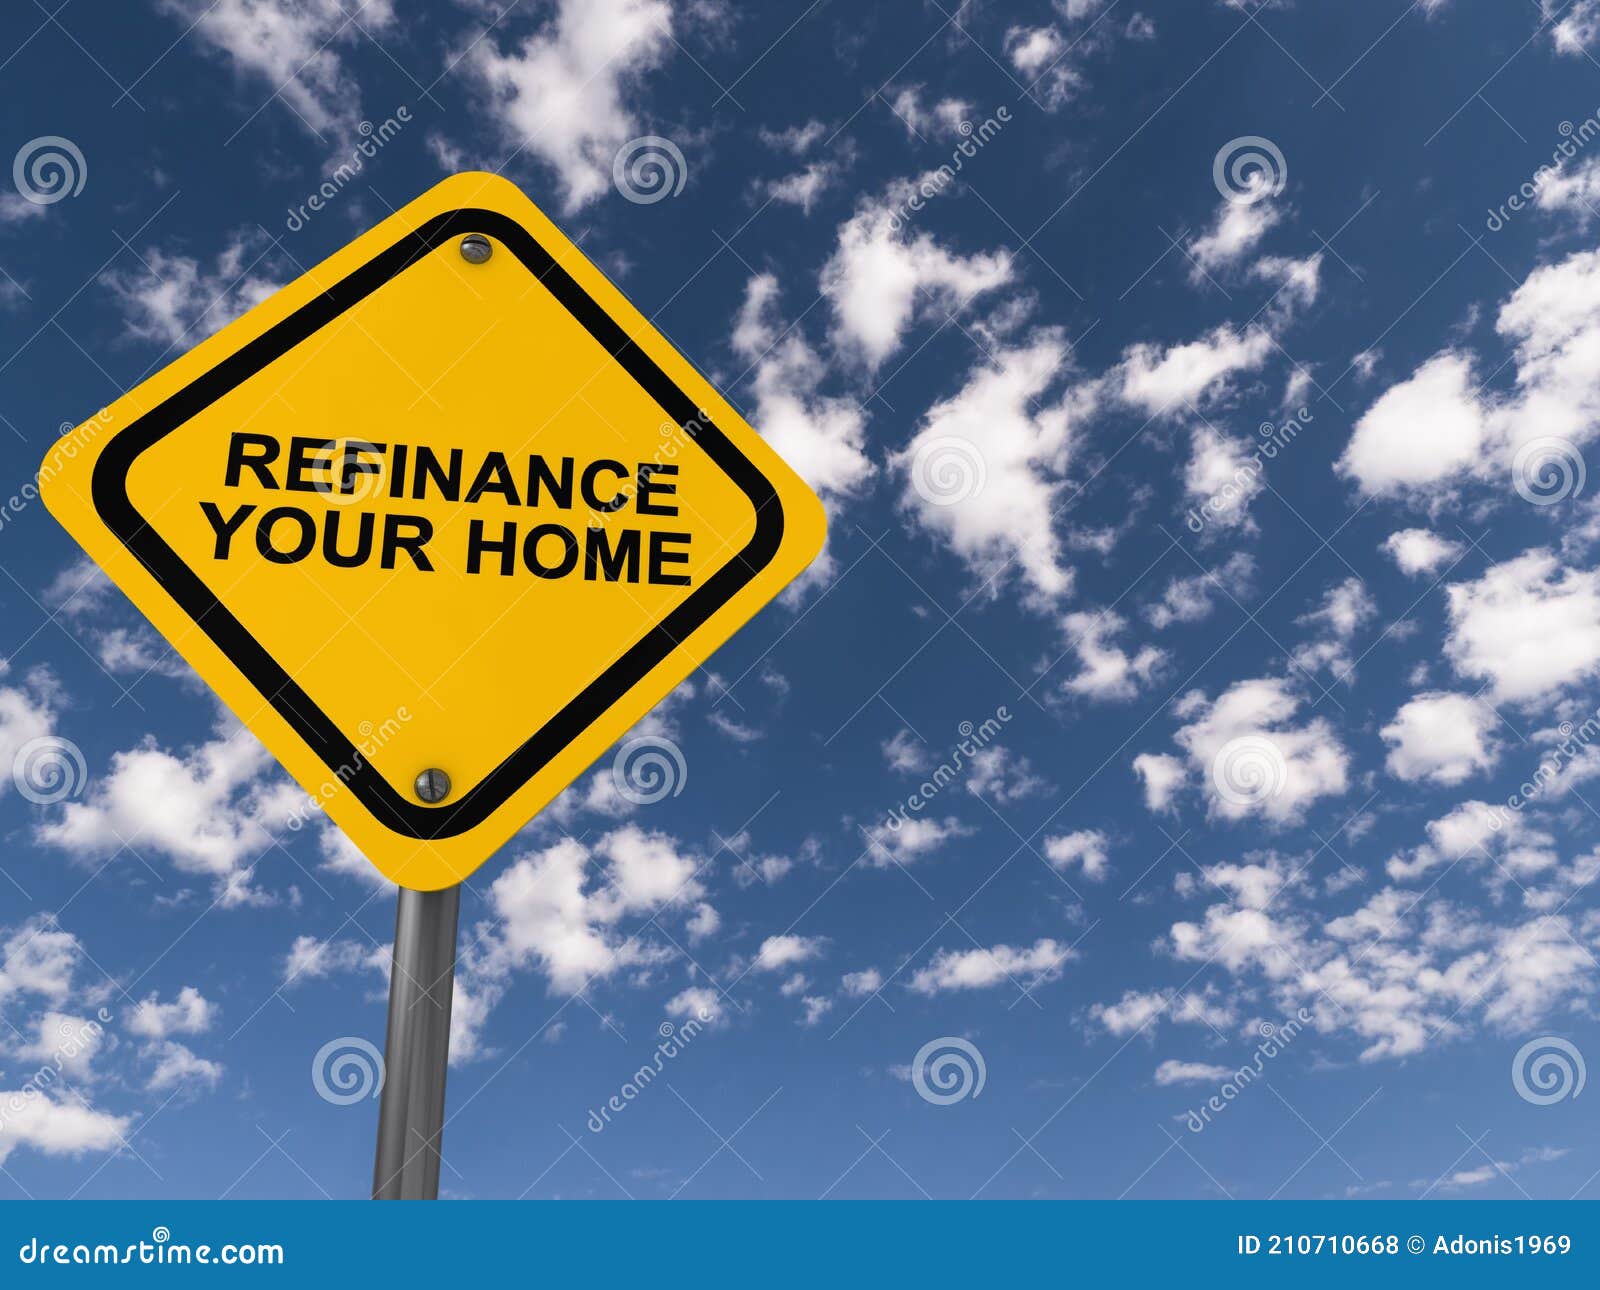 refinance your home traffic sign